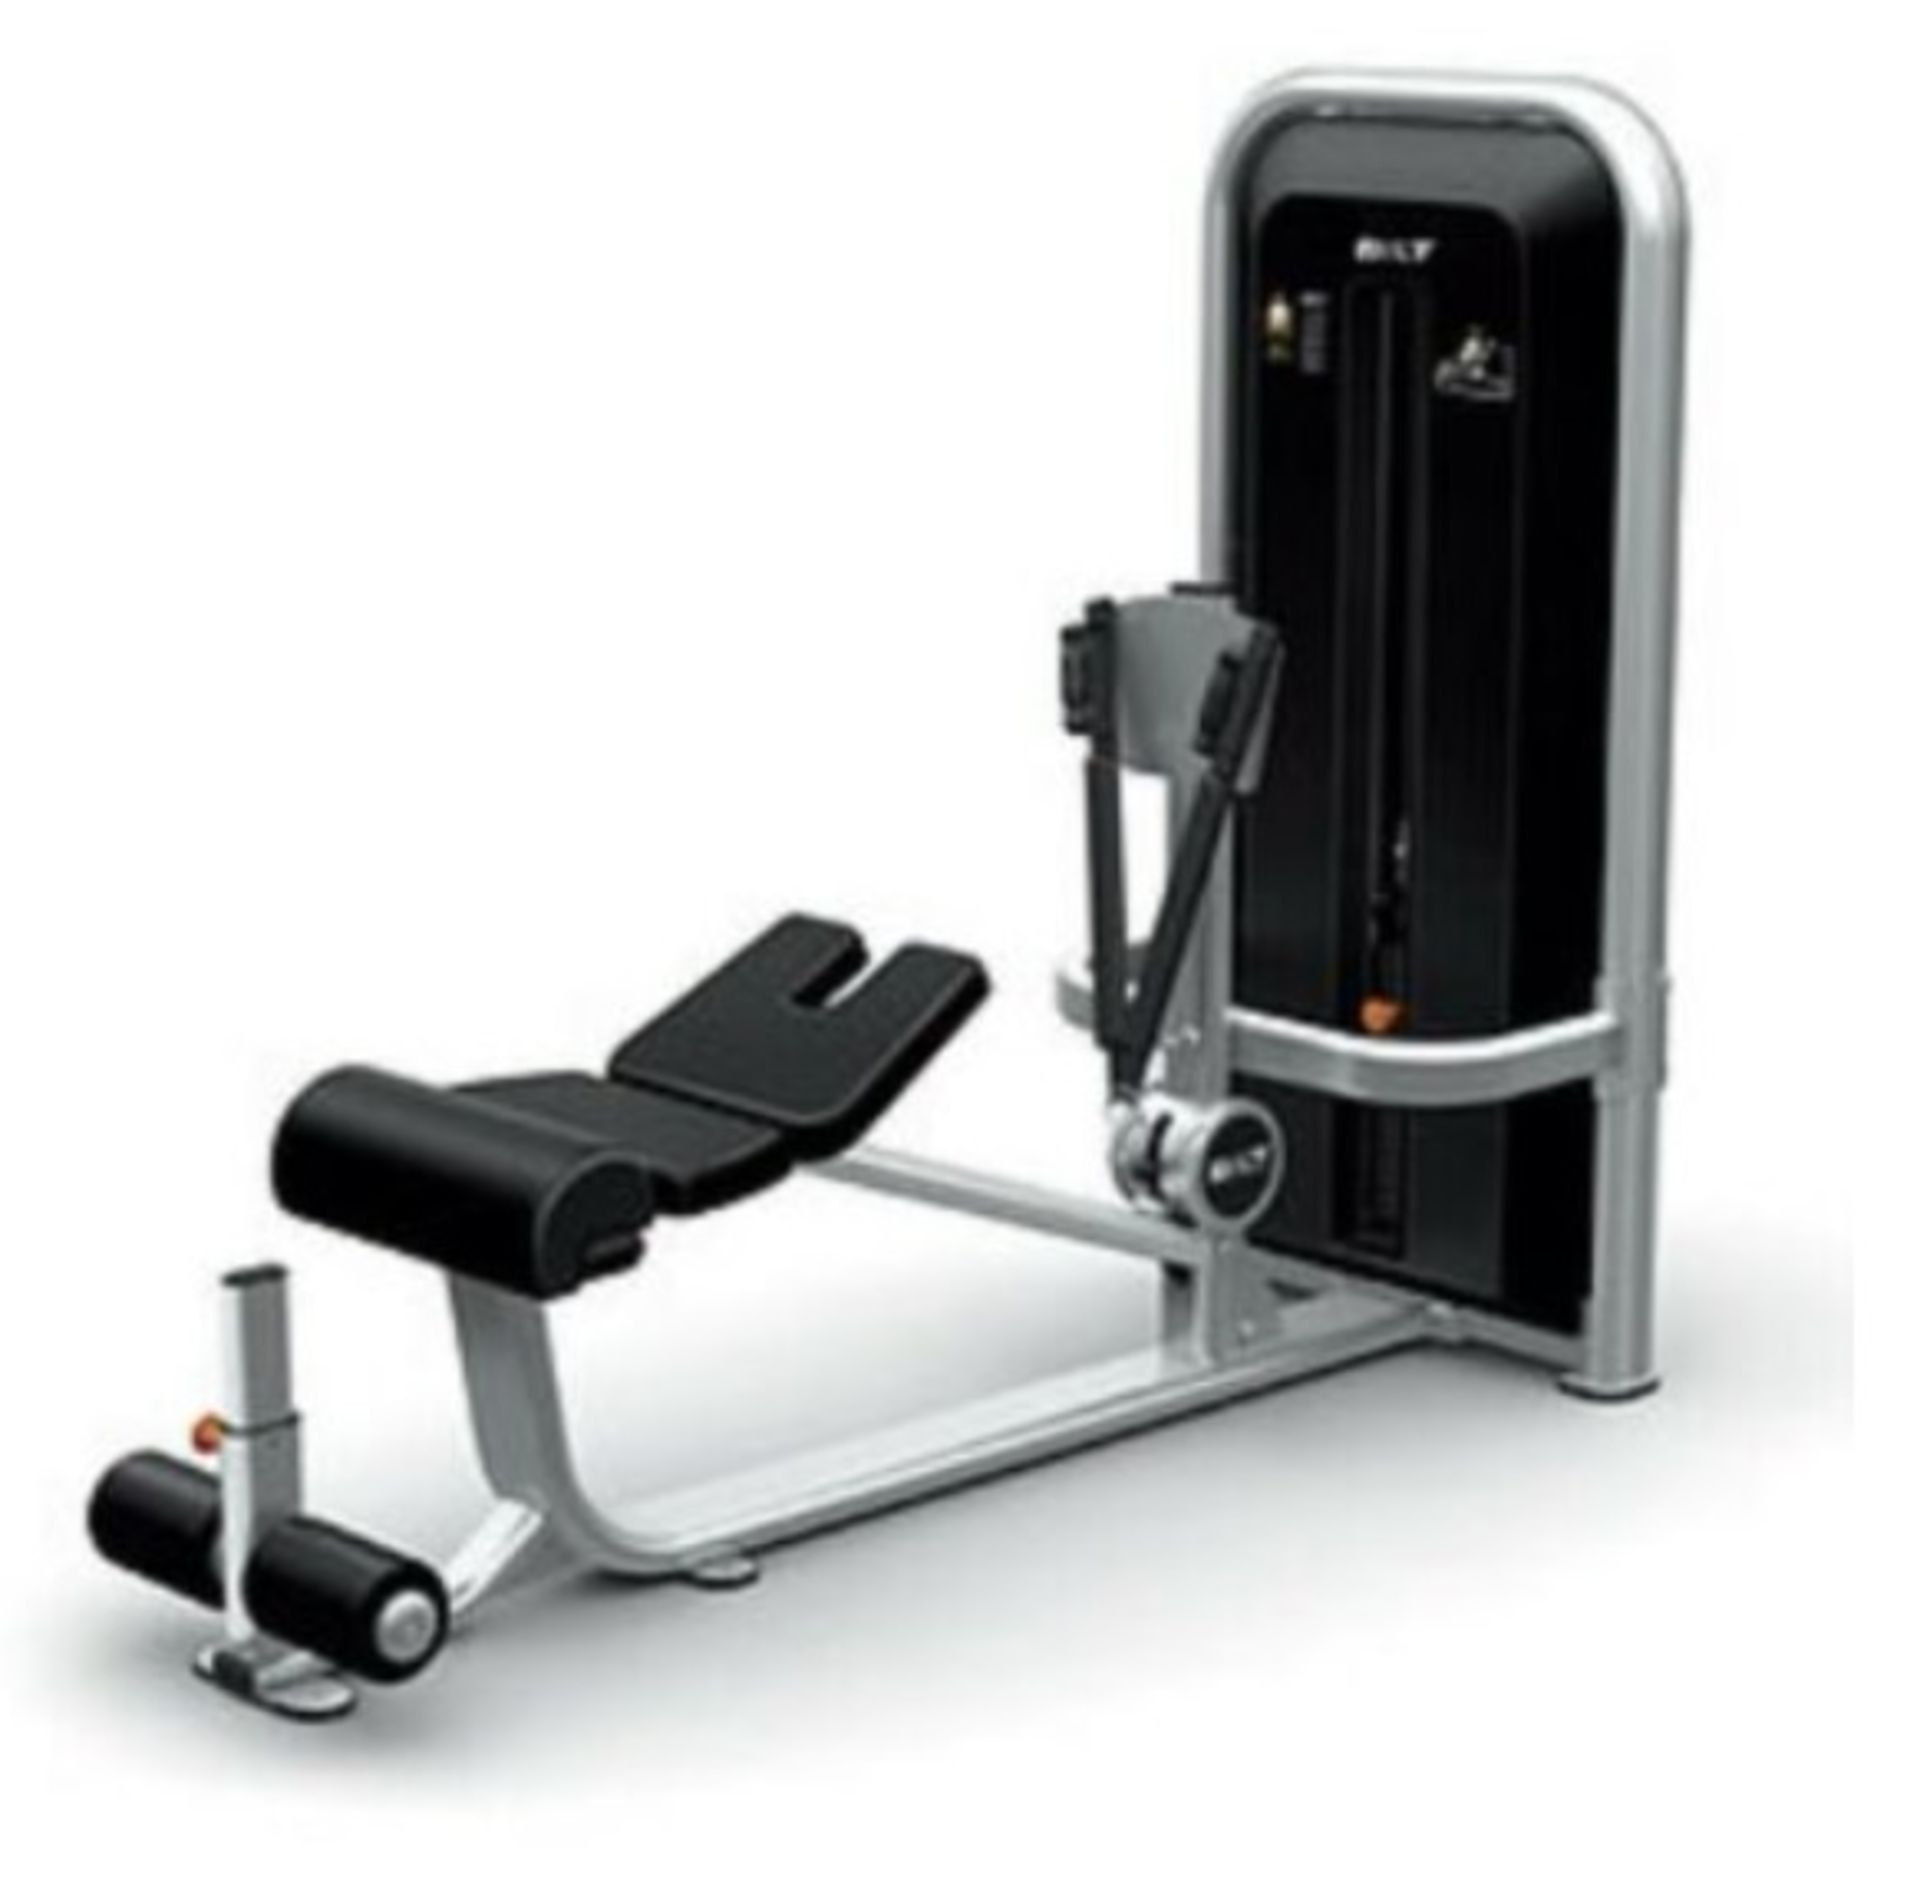 BILT Abdo Commercial Gym Machine By Agassi & Reyes - New / Boxed